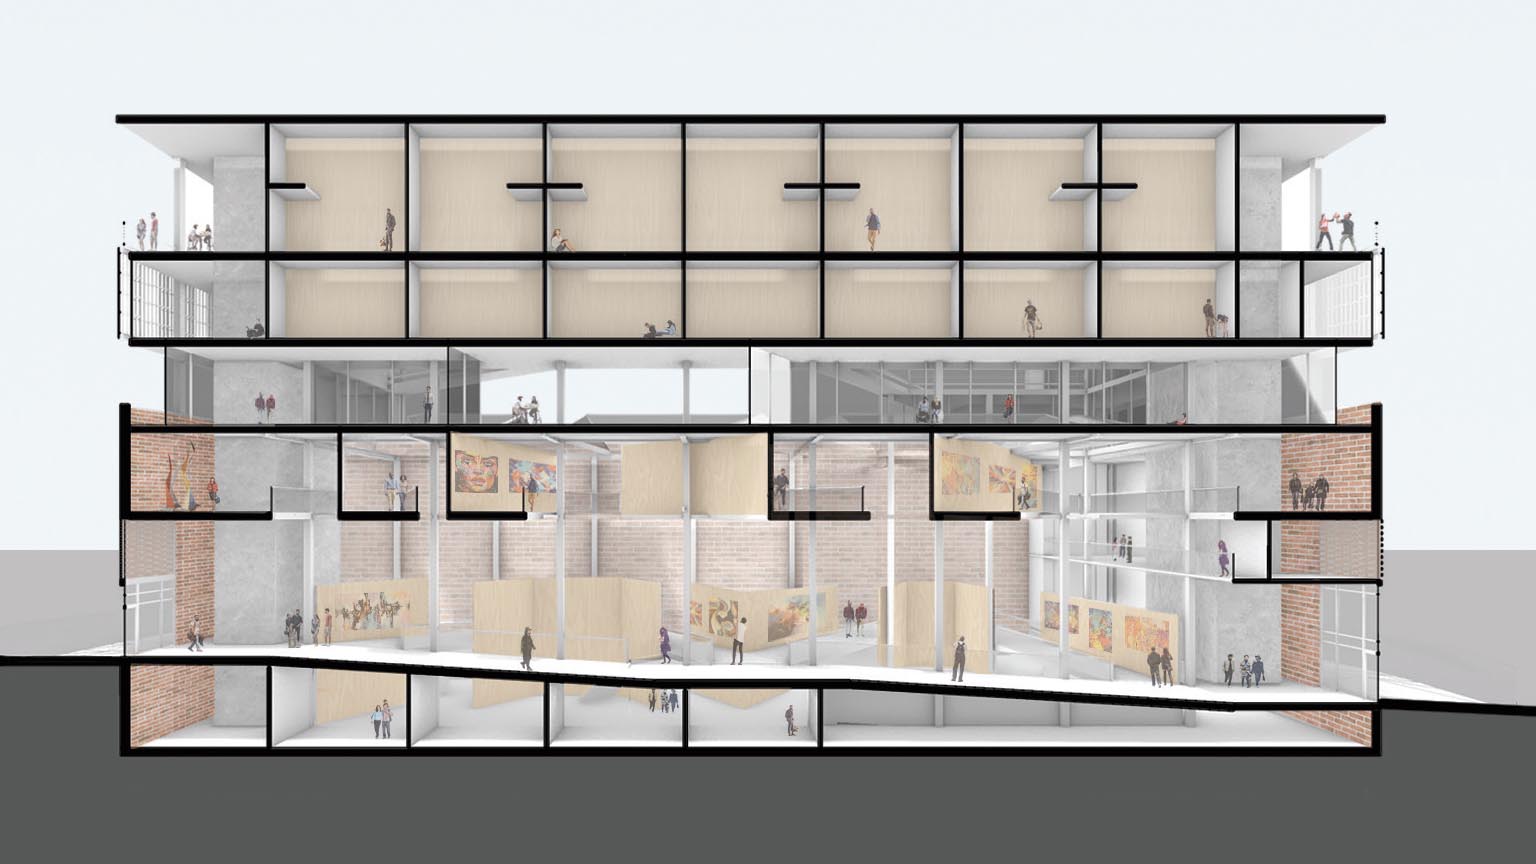 Section perspective showing how floor cuts work to form the gallery walkways and how those are always visually connected to the ground and basement floors. It also highlights the co-working floor, which has an inset glass façade that allows the co-living floors to conceptually float above the existing brick building.